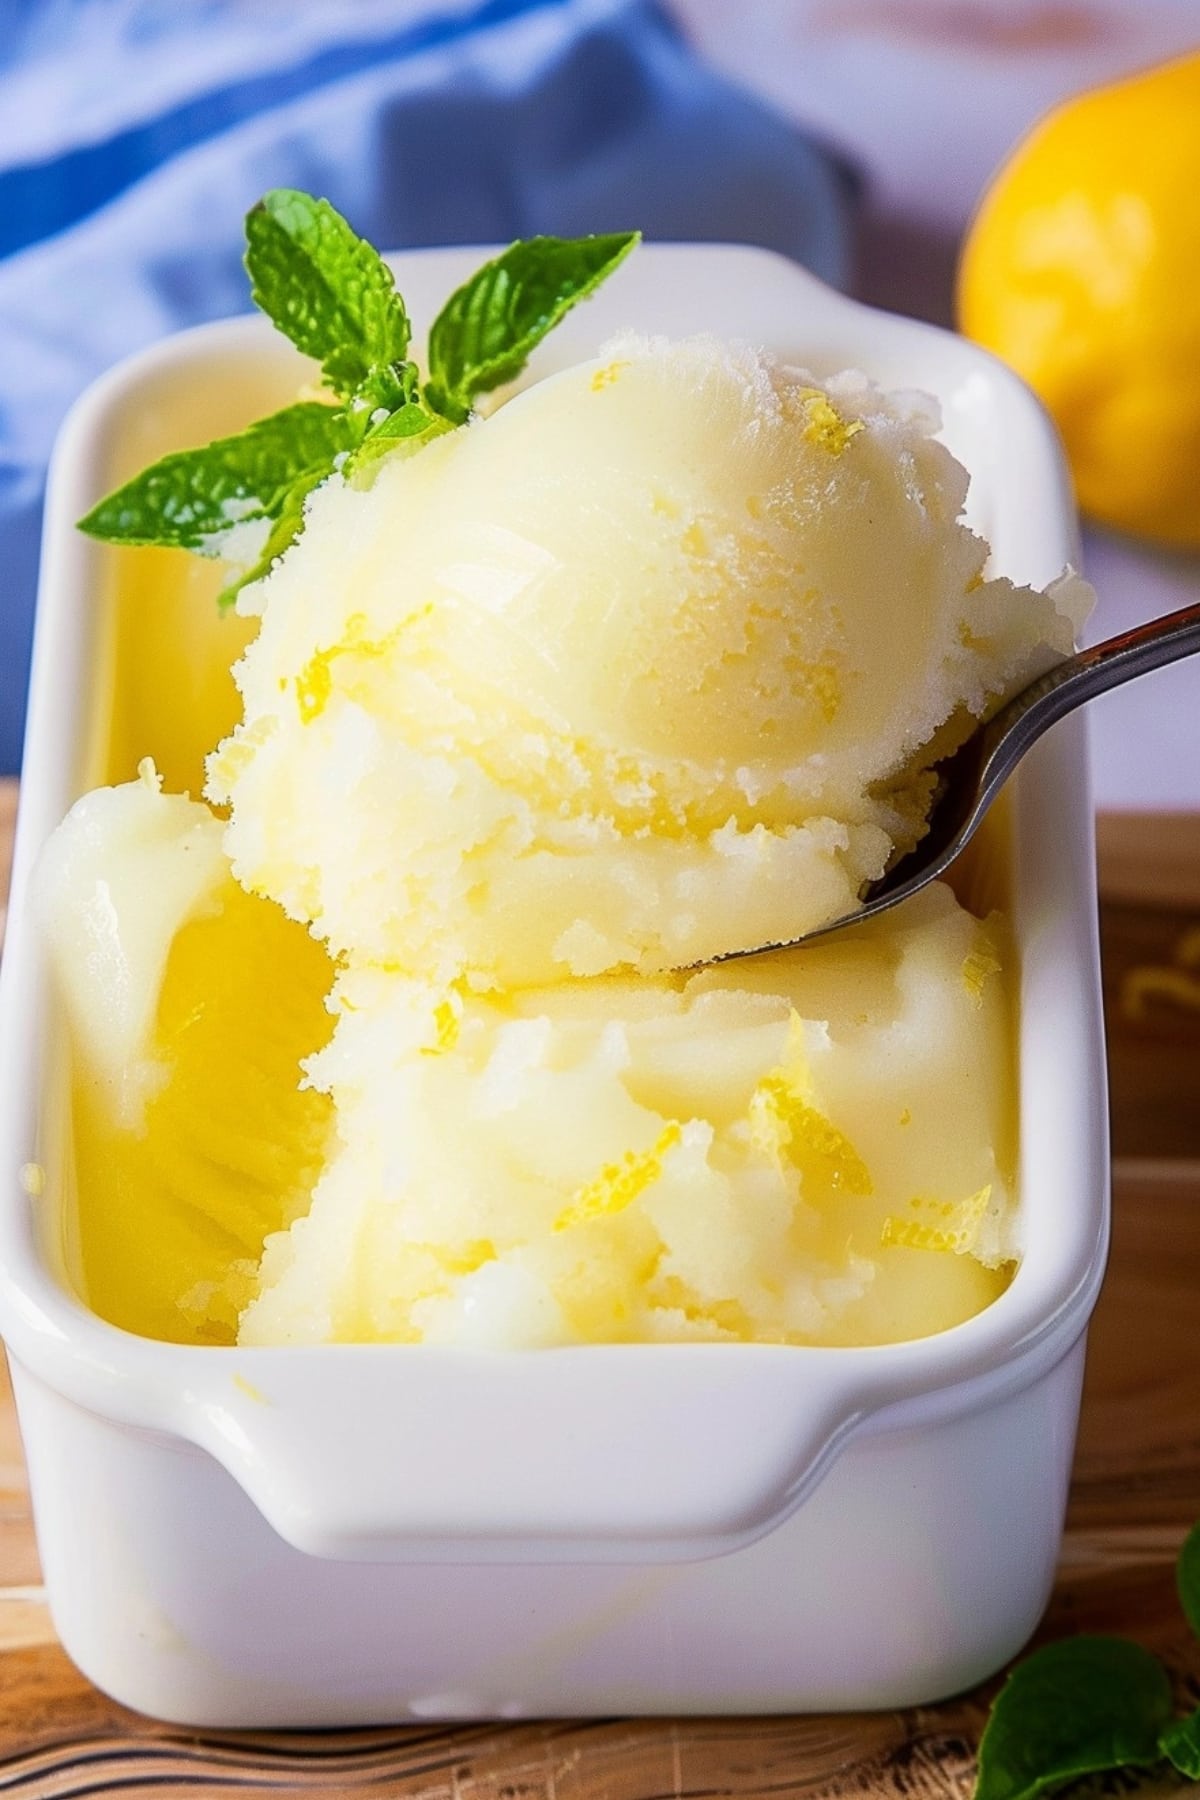 Lemon sorbet in a square dish scooped with a spoon, garnished with mint leaves.